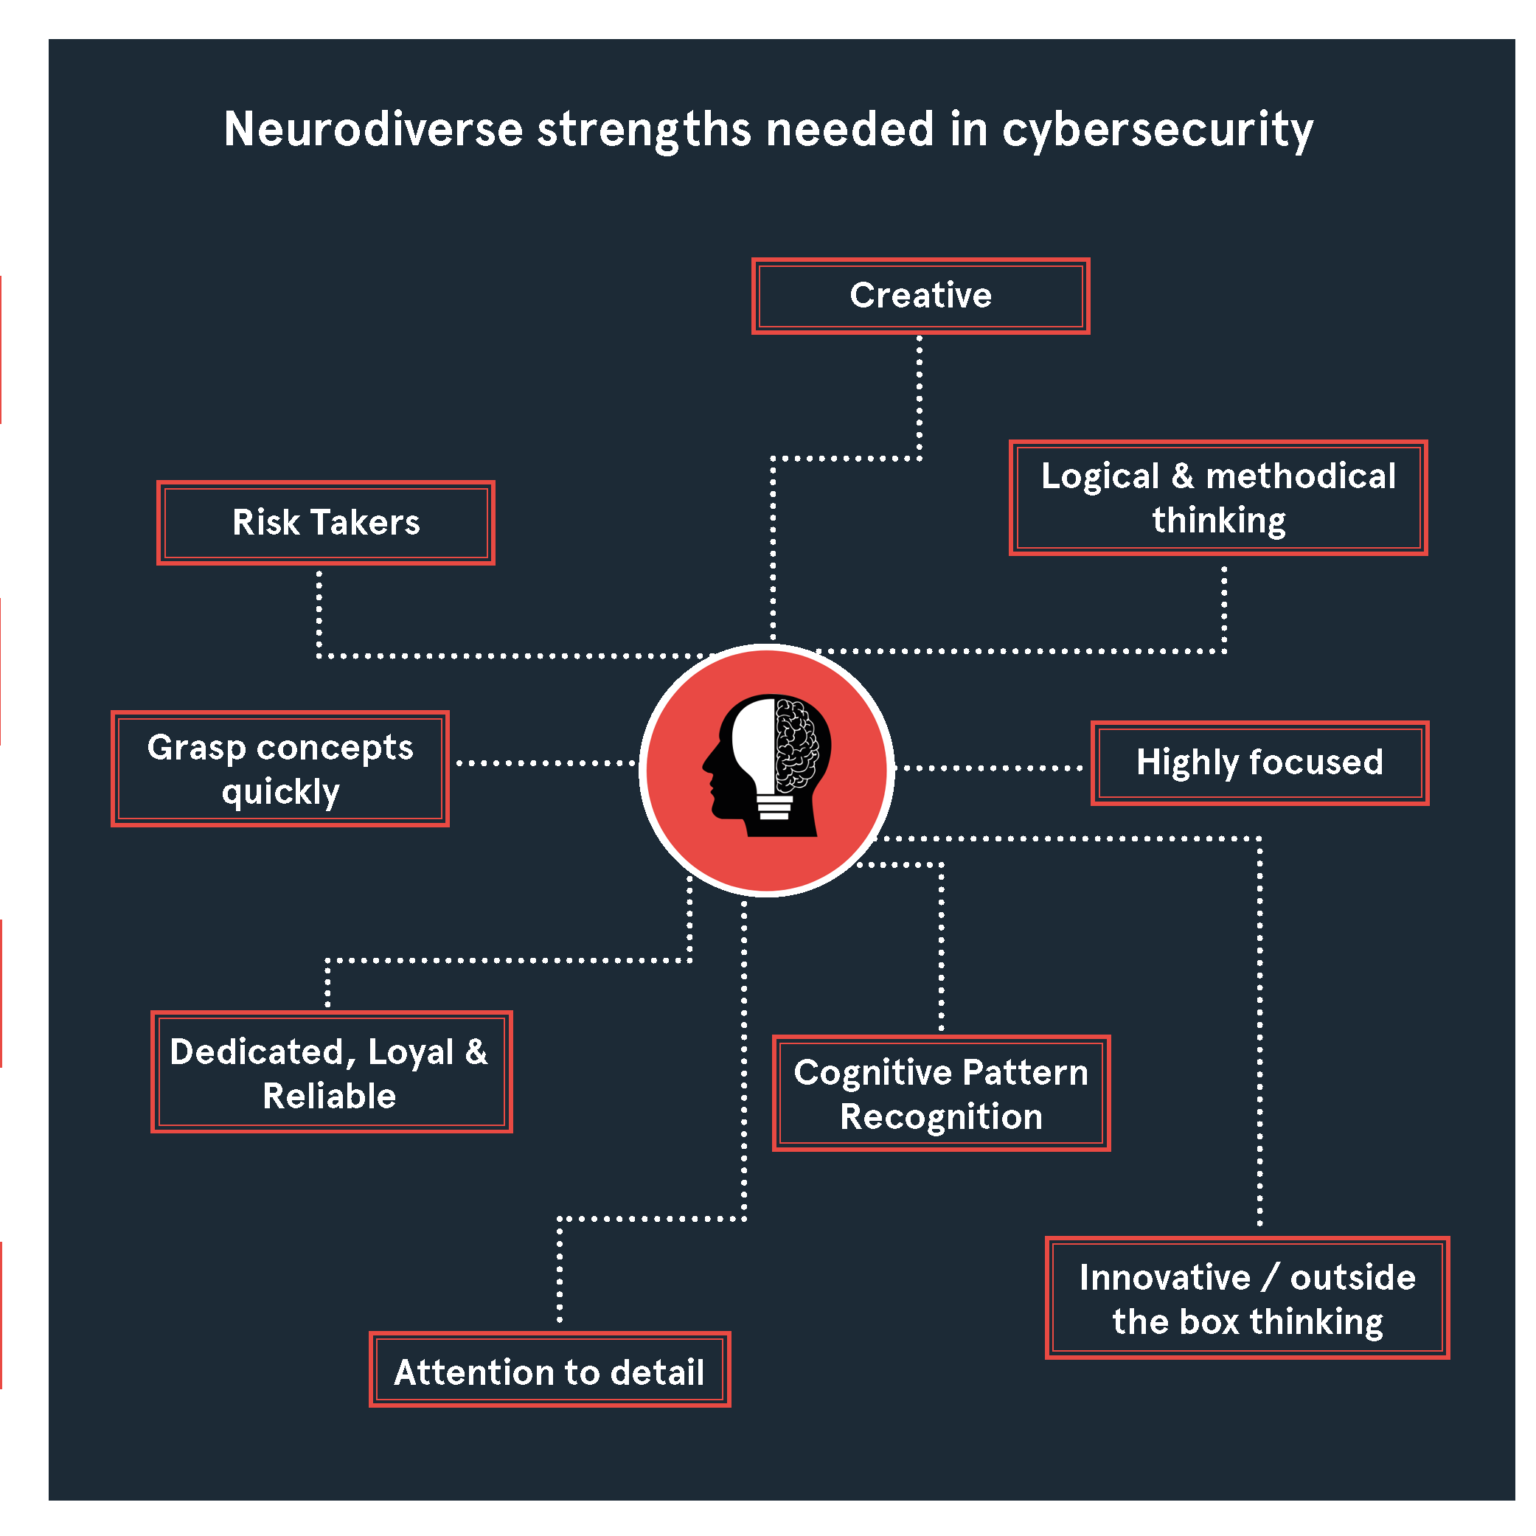 Neurodiverse strengths needed in cybersecurity